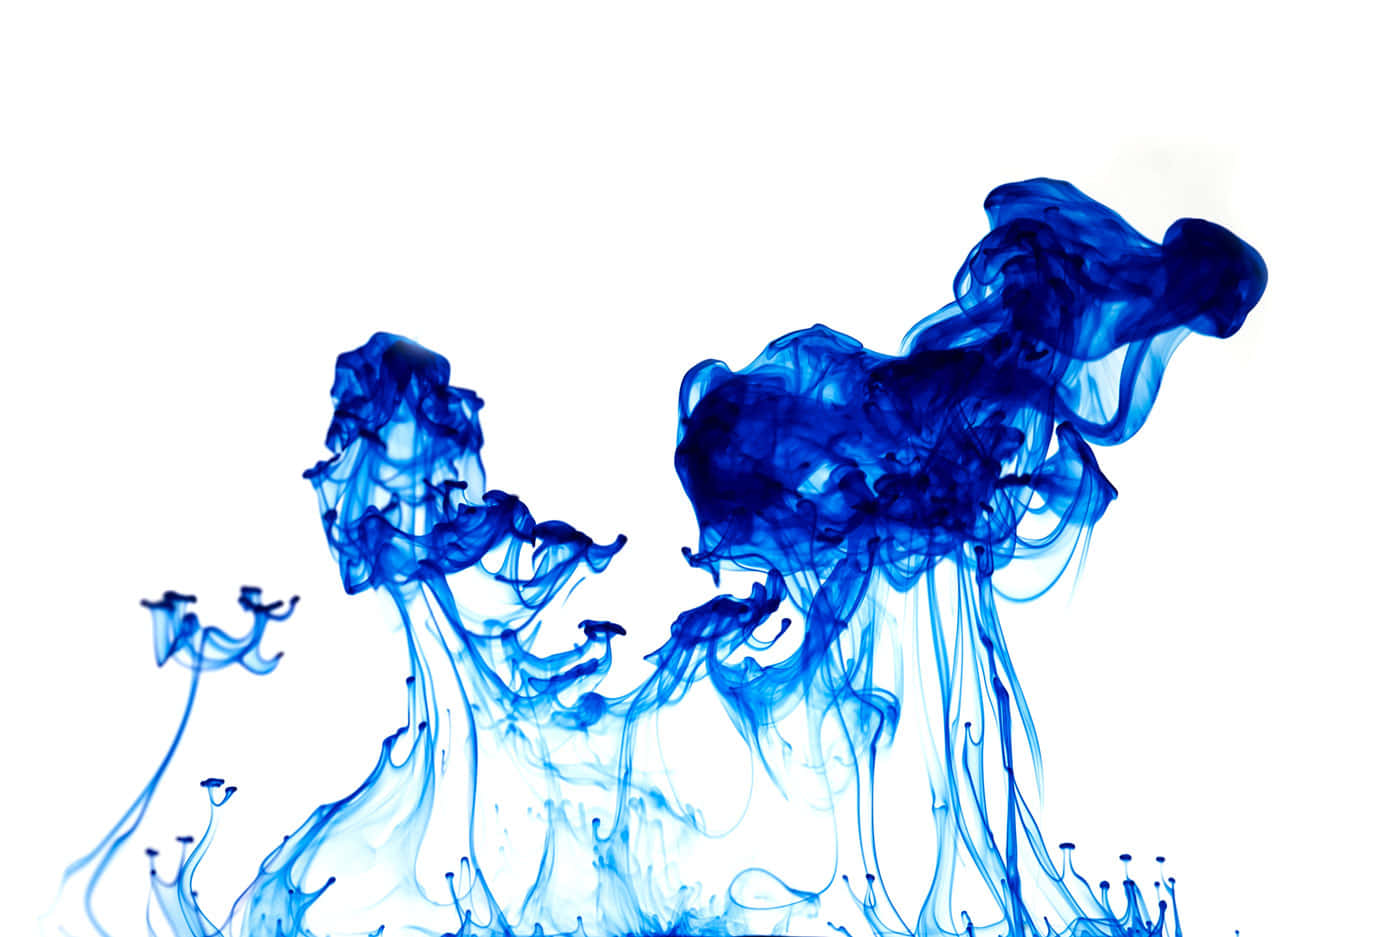 Coherent Blue Pigment In The Water Wallpaper